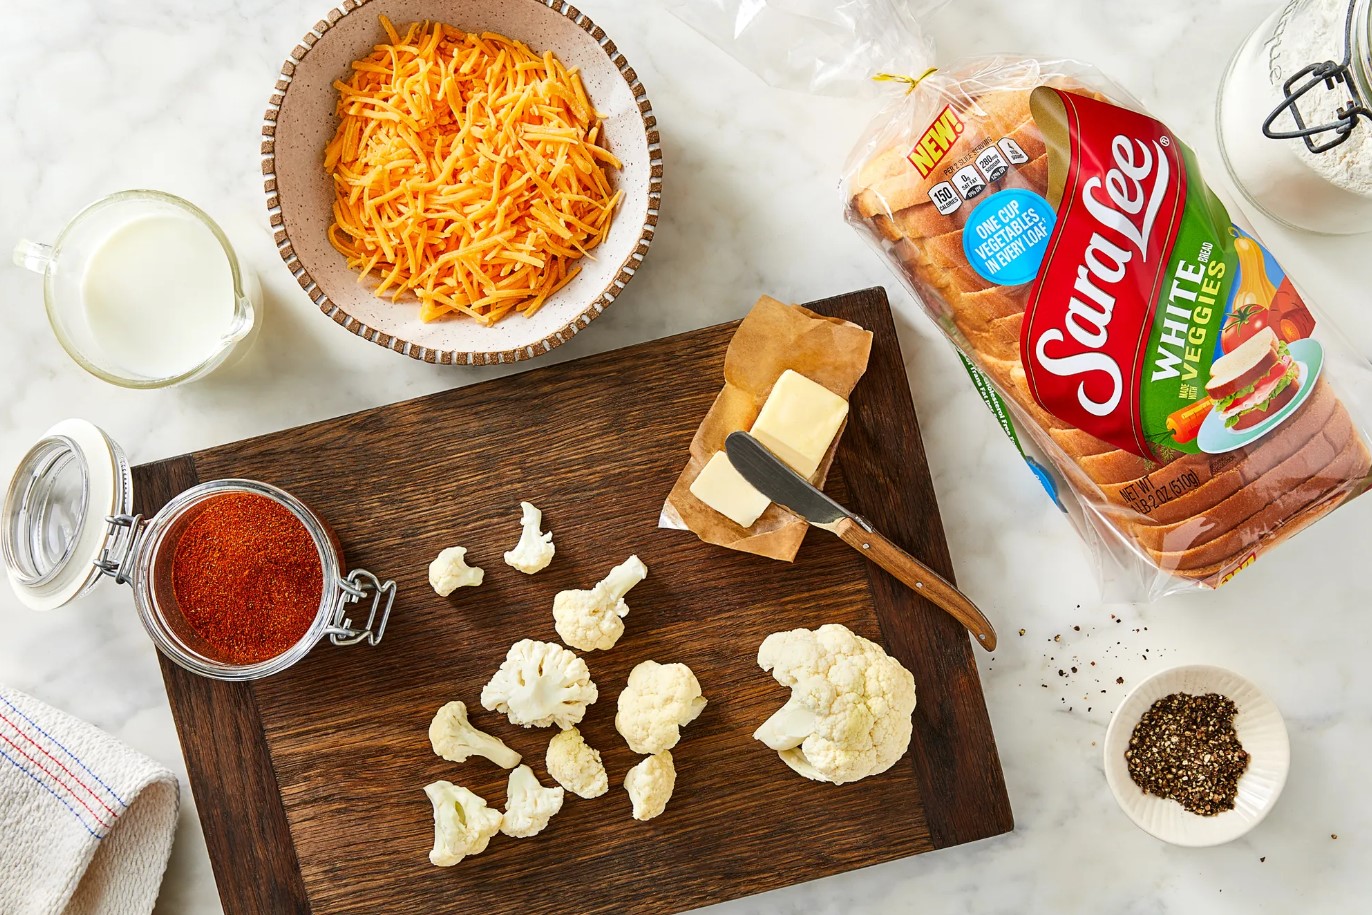 Sara Lee launches new bread with vegetables for picky eaters